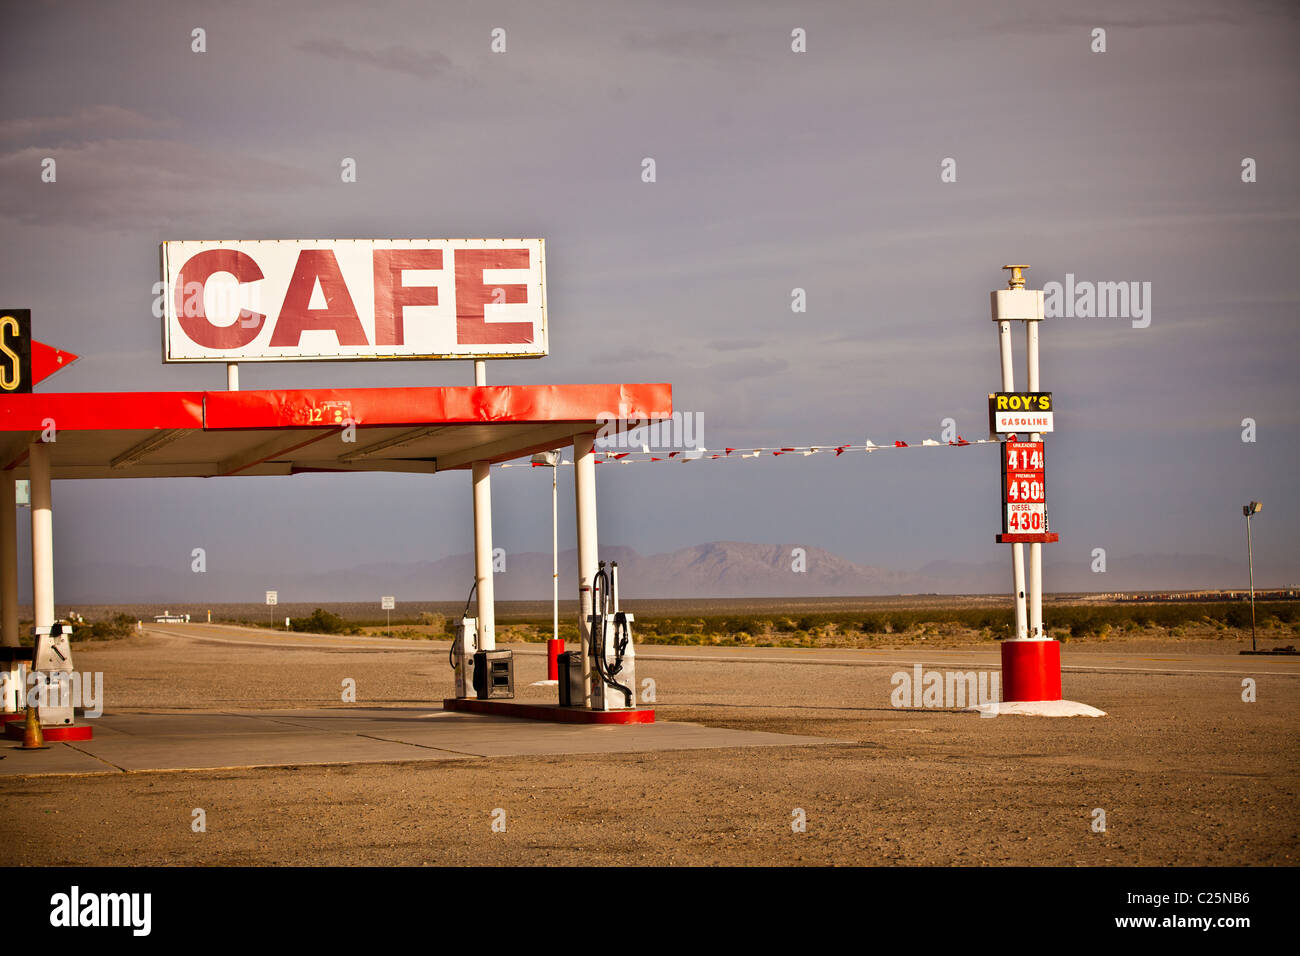 Roy's Motel & Cafe, historic landmark along the old Route 66 in the Mojave Desert Amboy, CA Stock Photo